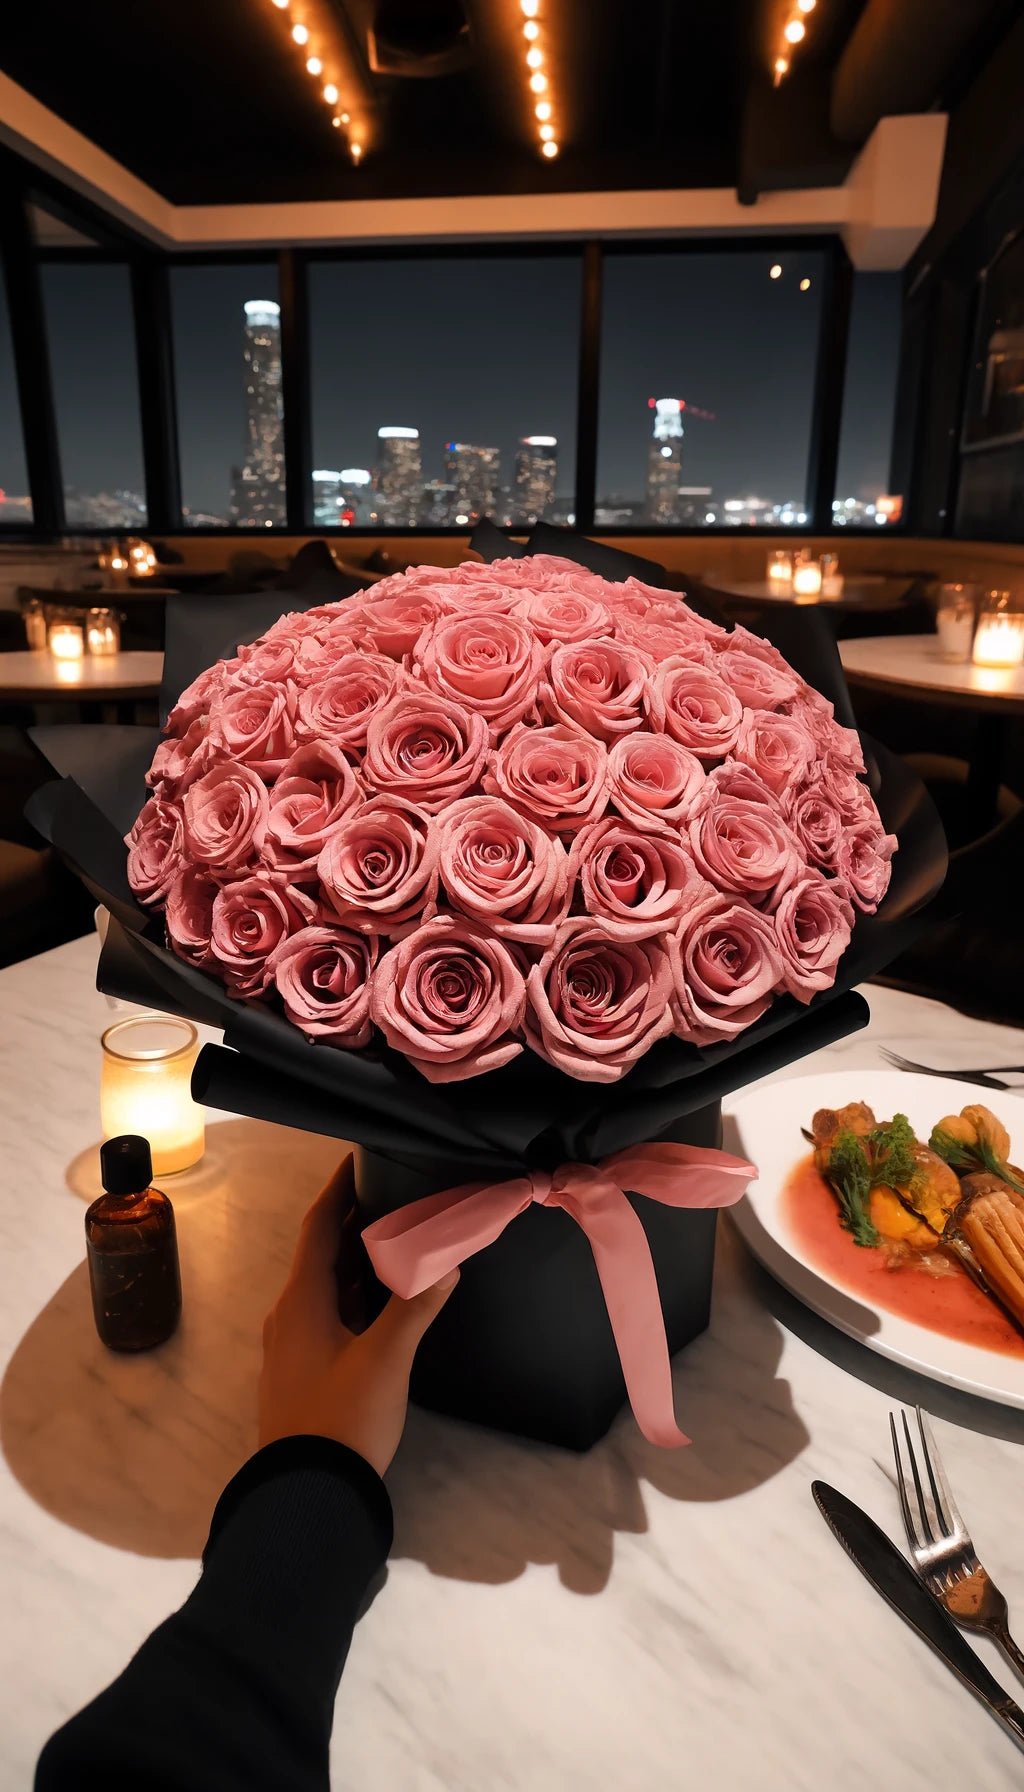 Preserved Pink Roses Flower Bouquet - Imaginary Worlds